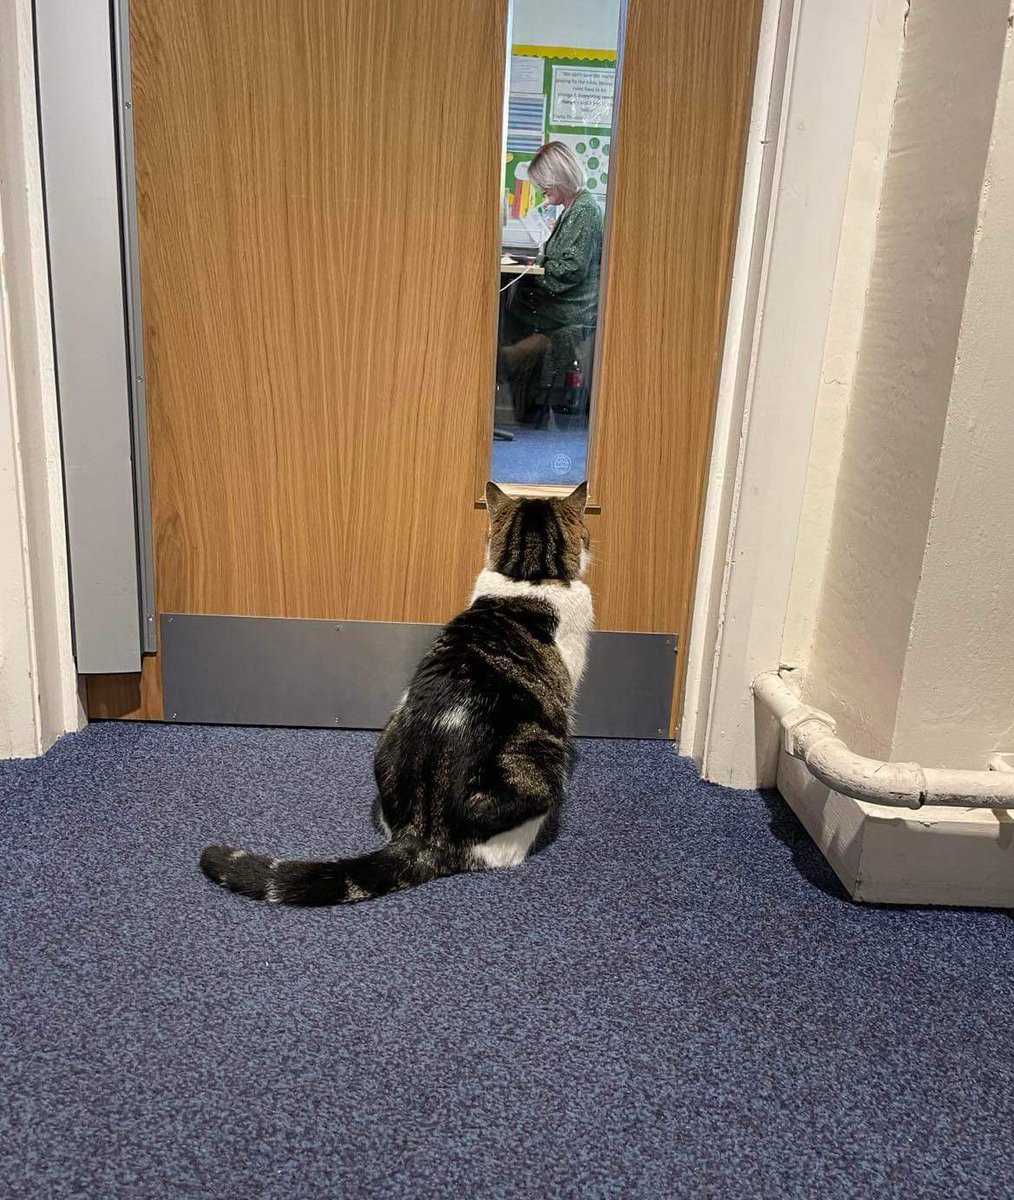 Waiting for an audience with the headteacher. 
I’m going to recommend they add prawns to the school dinner menu and get more cushions for the library. 
#catsoftwitter #cats #Hedgewatch